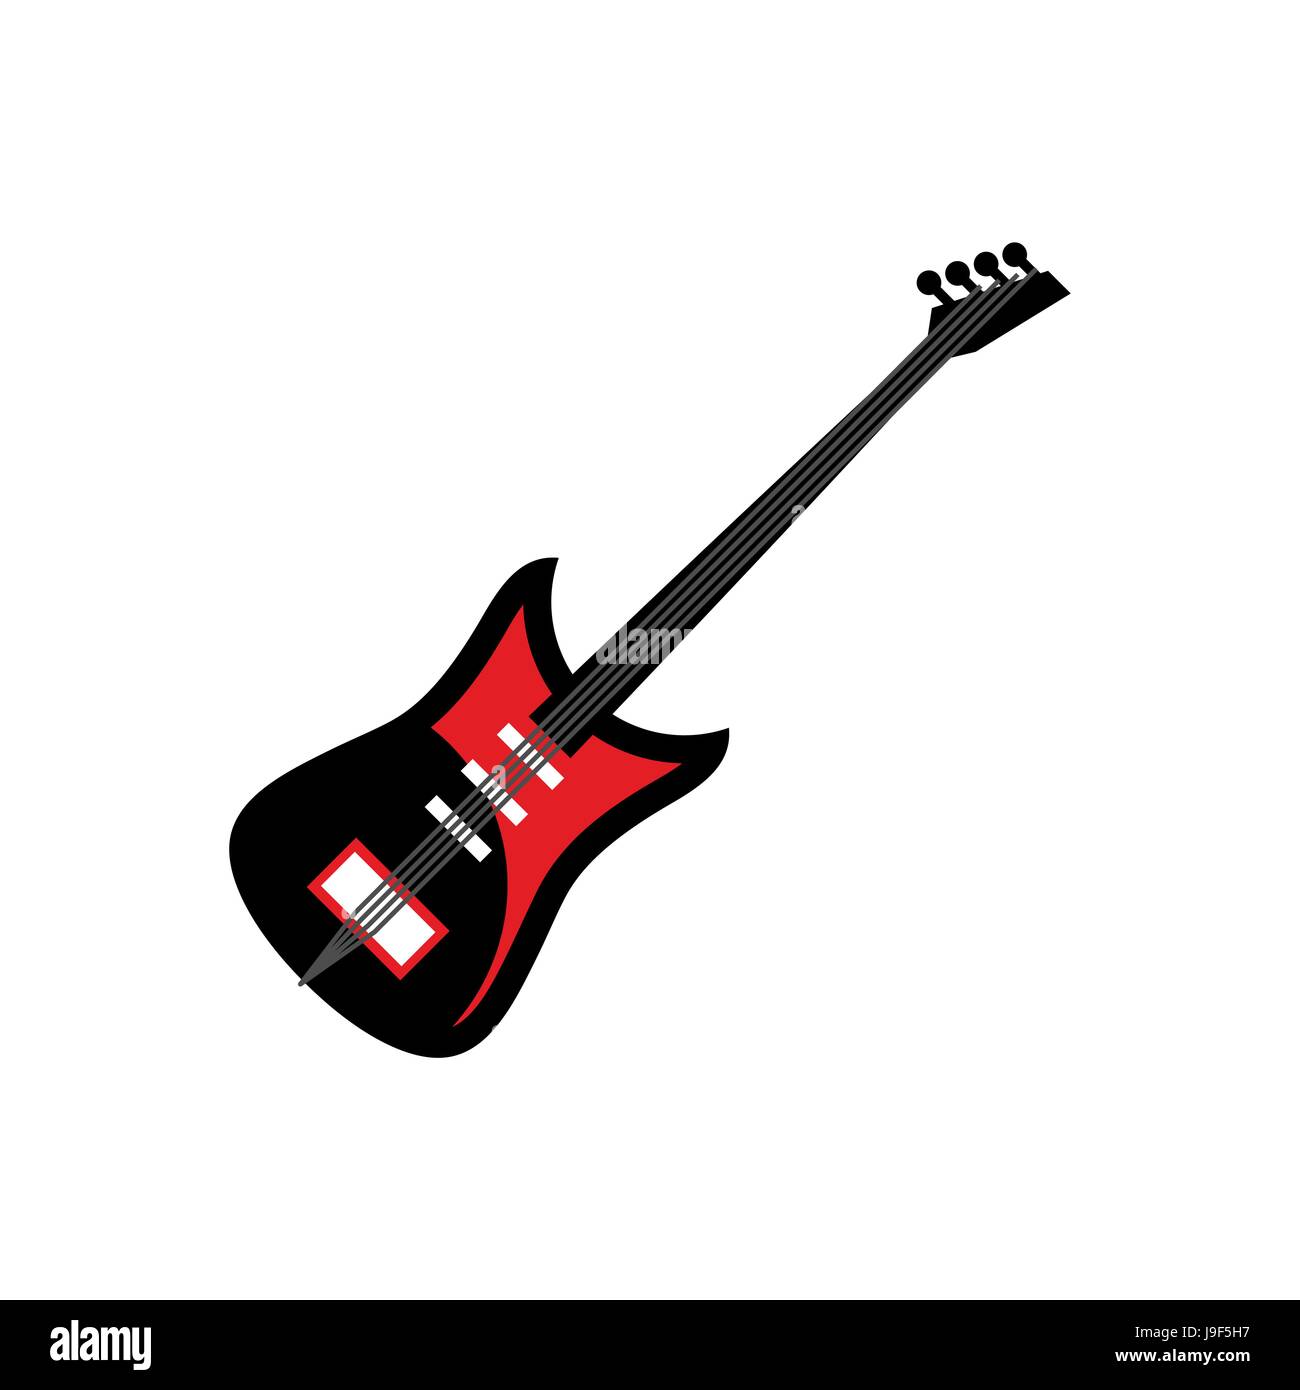 Electric guitar isolated. Musical instruments on white background Stock Vector